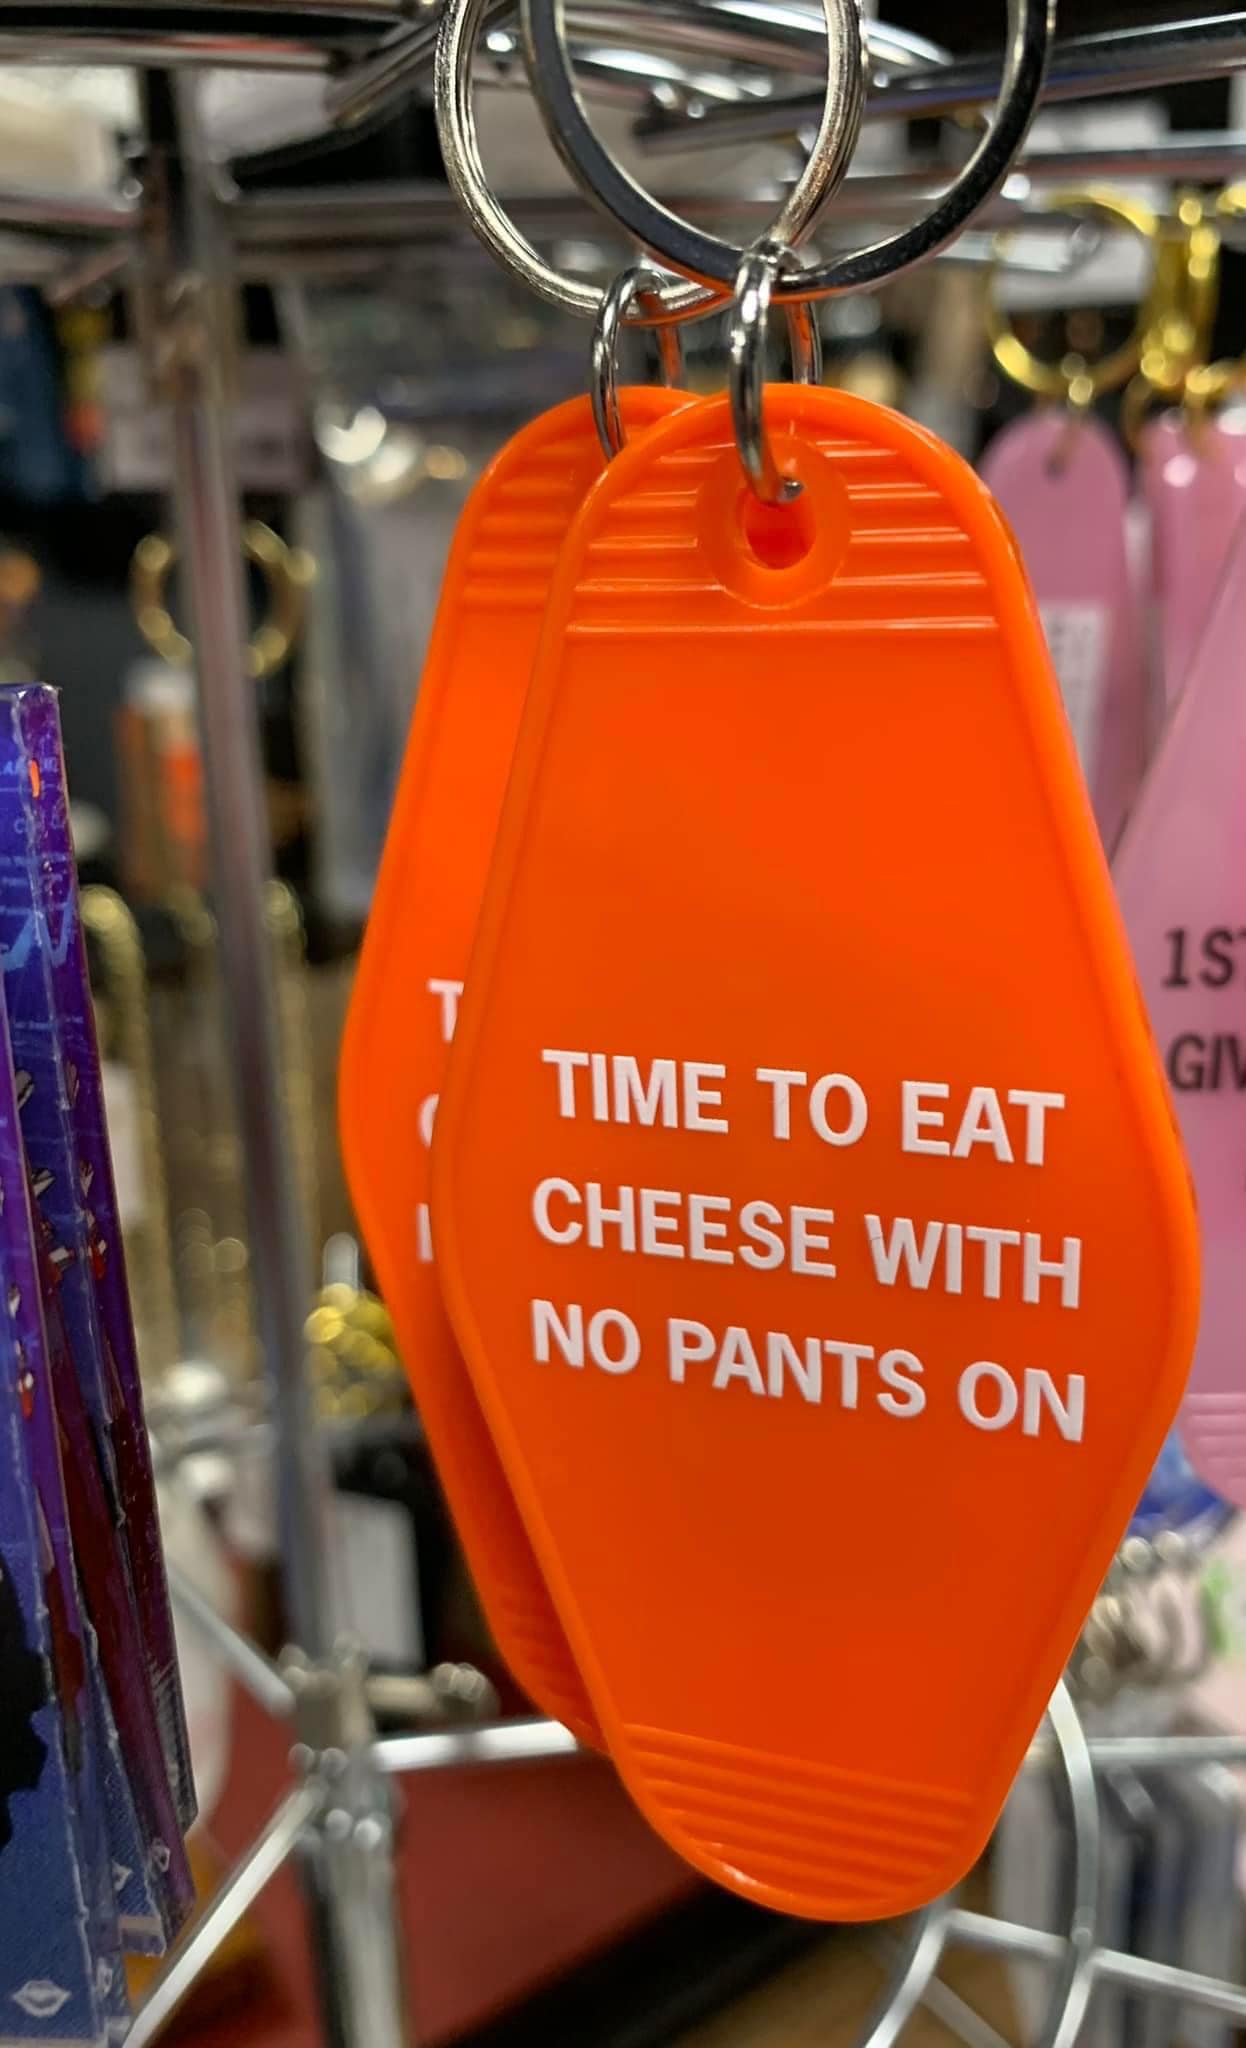 funny pictures - funny orange - T Time To Eat Cheese With No Pants On 1S Giv